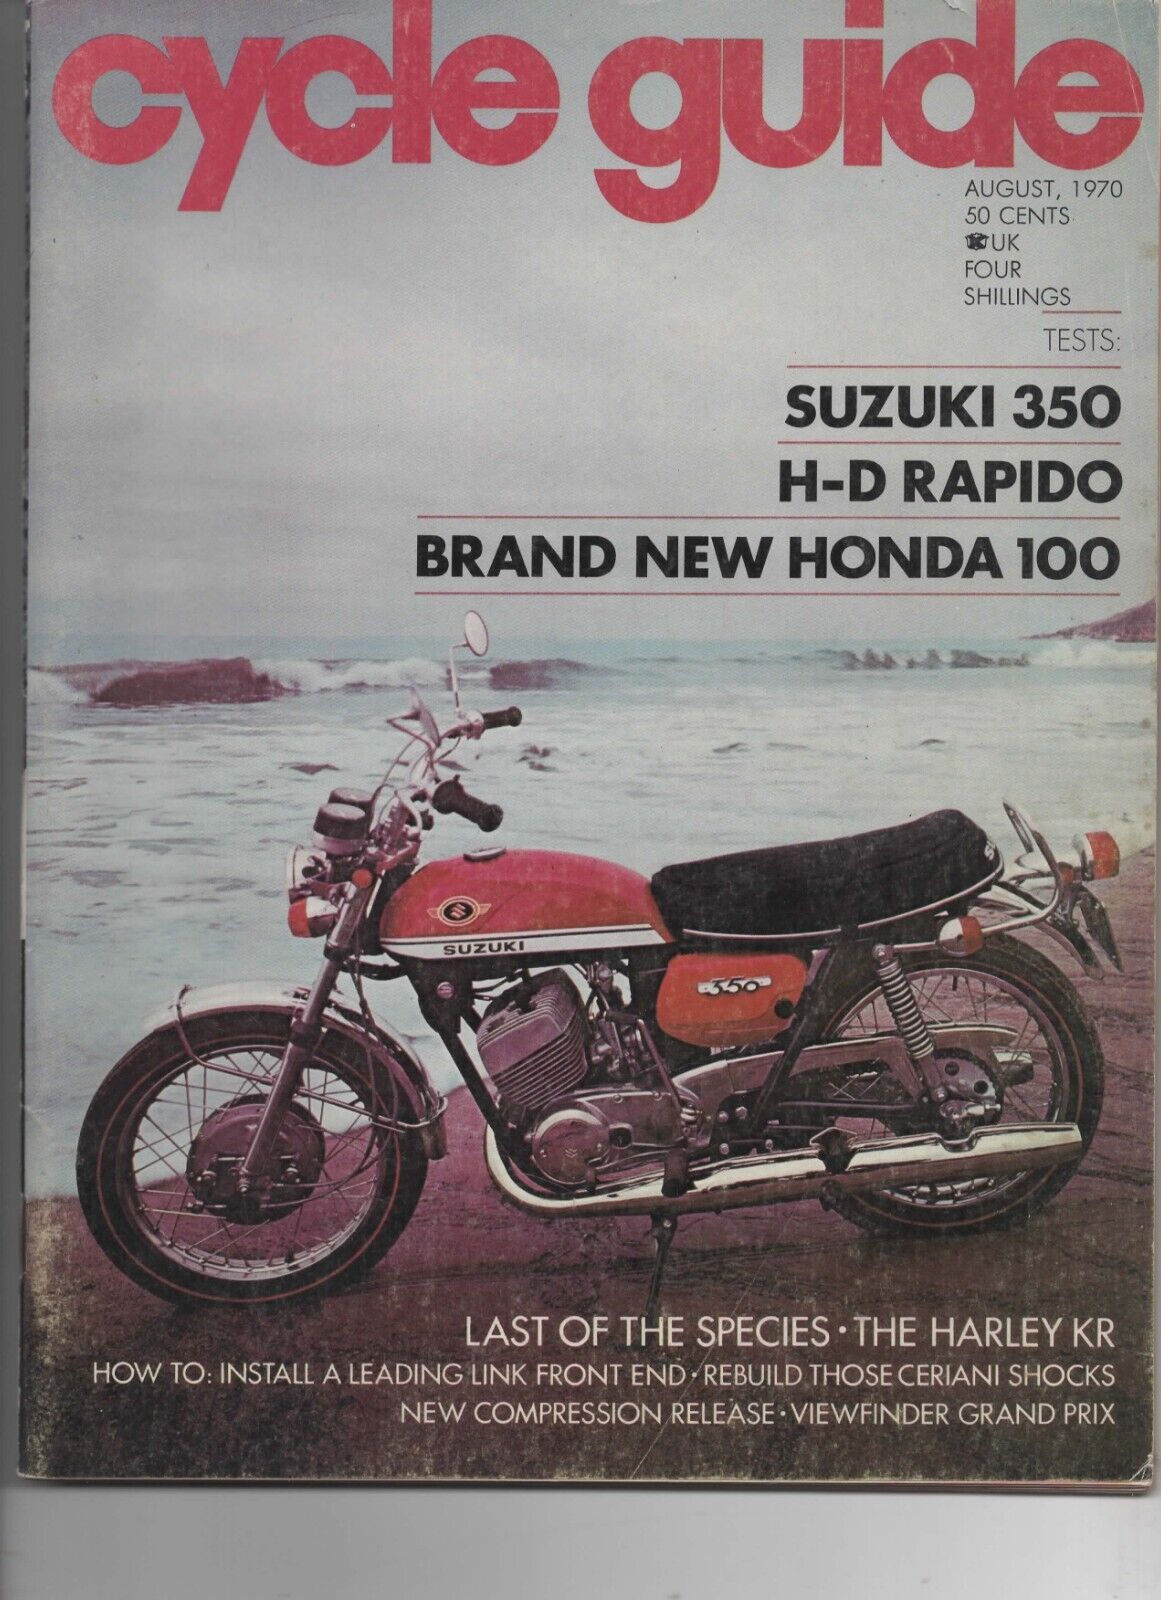 CYCLE GUIDE, Magazine, August 1970 (Suzuki 350 Motorcycle)